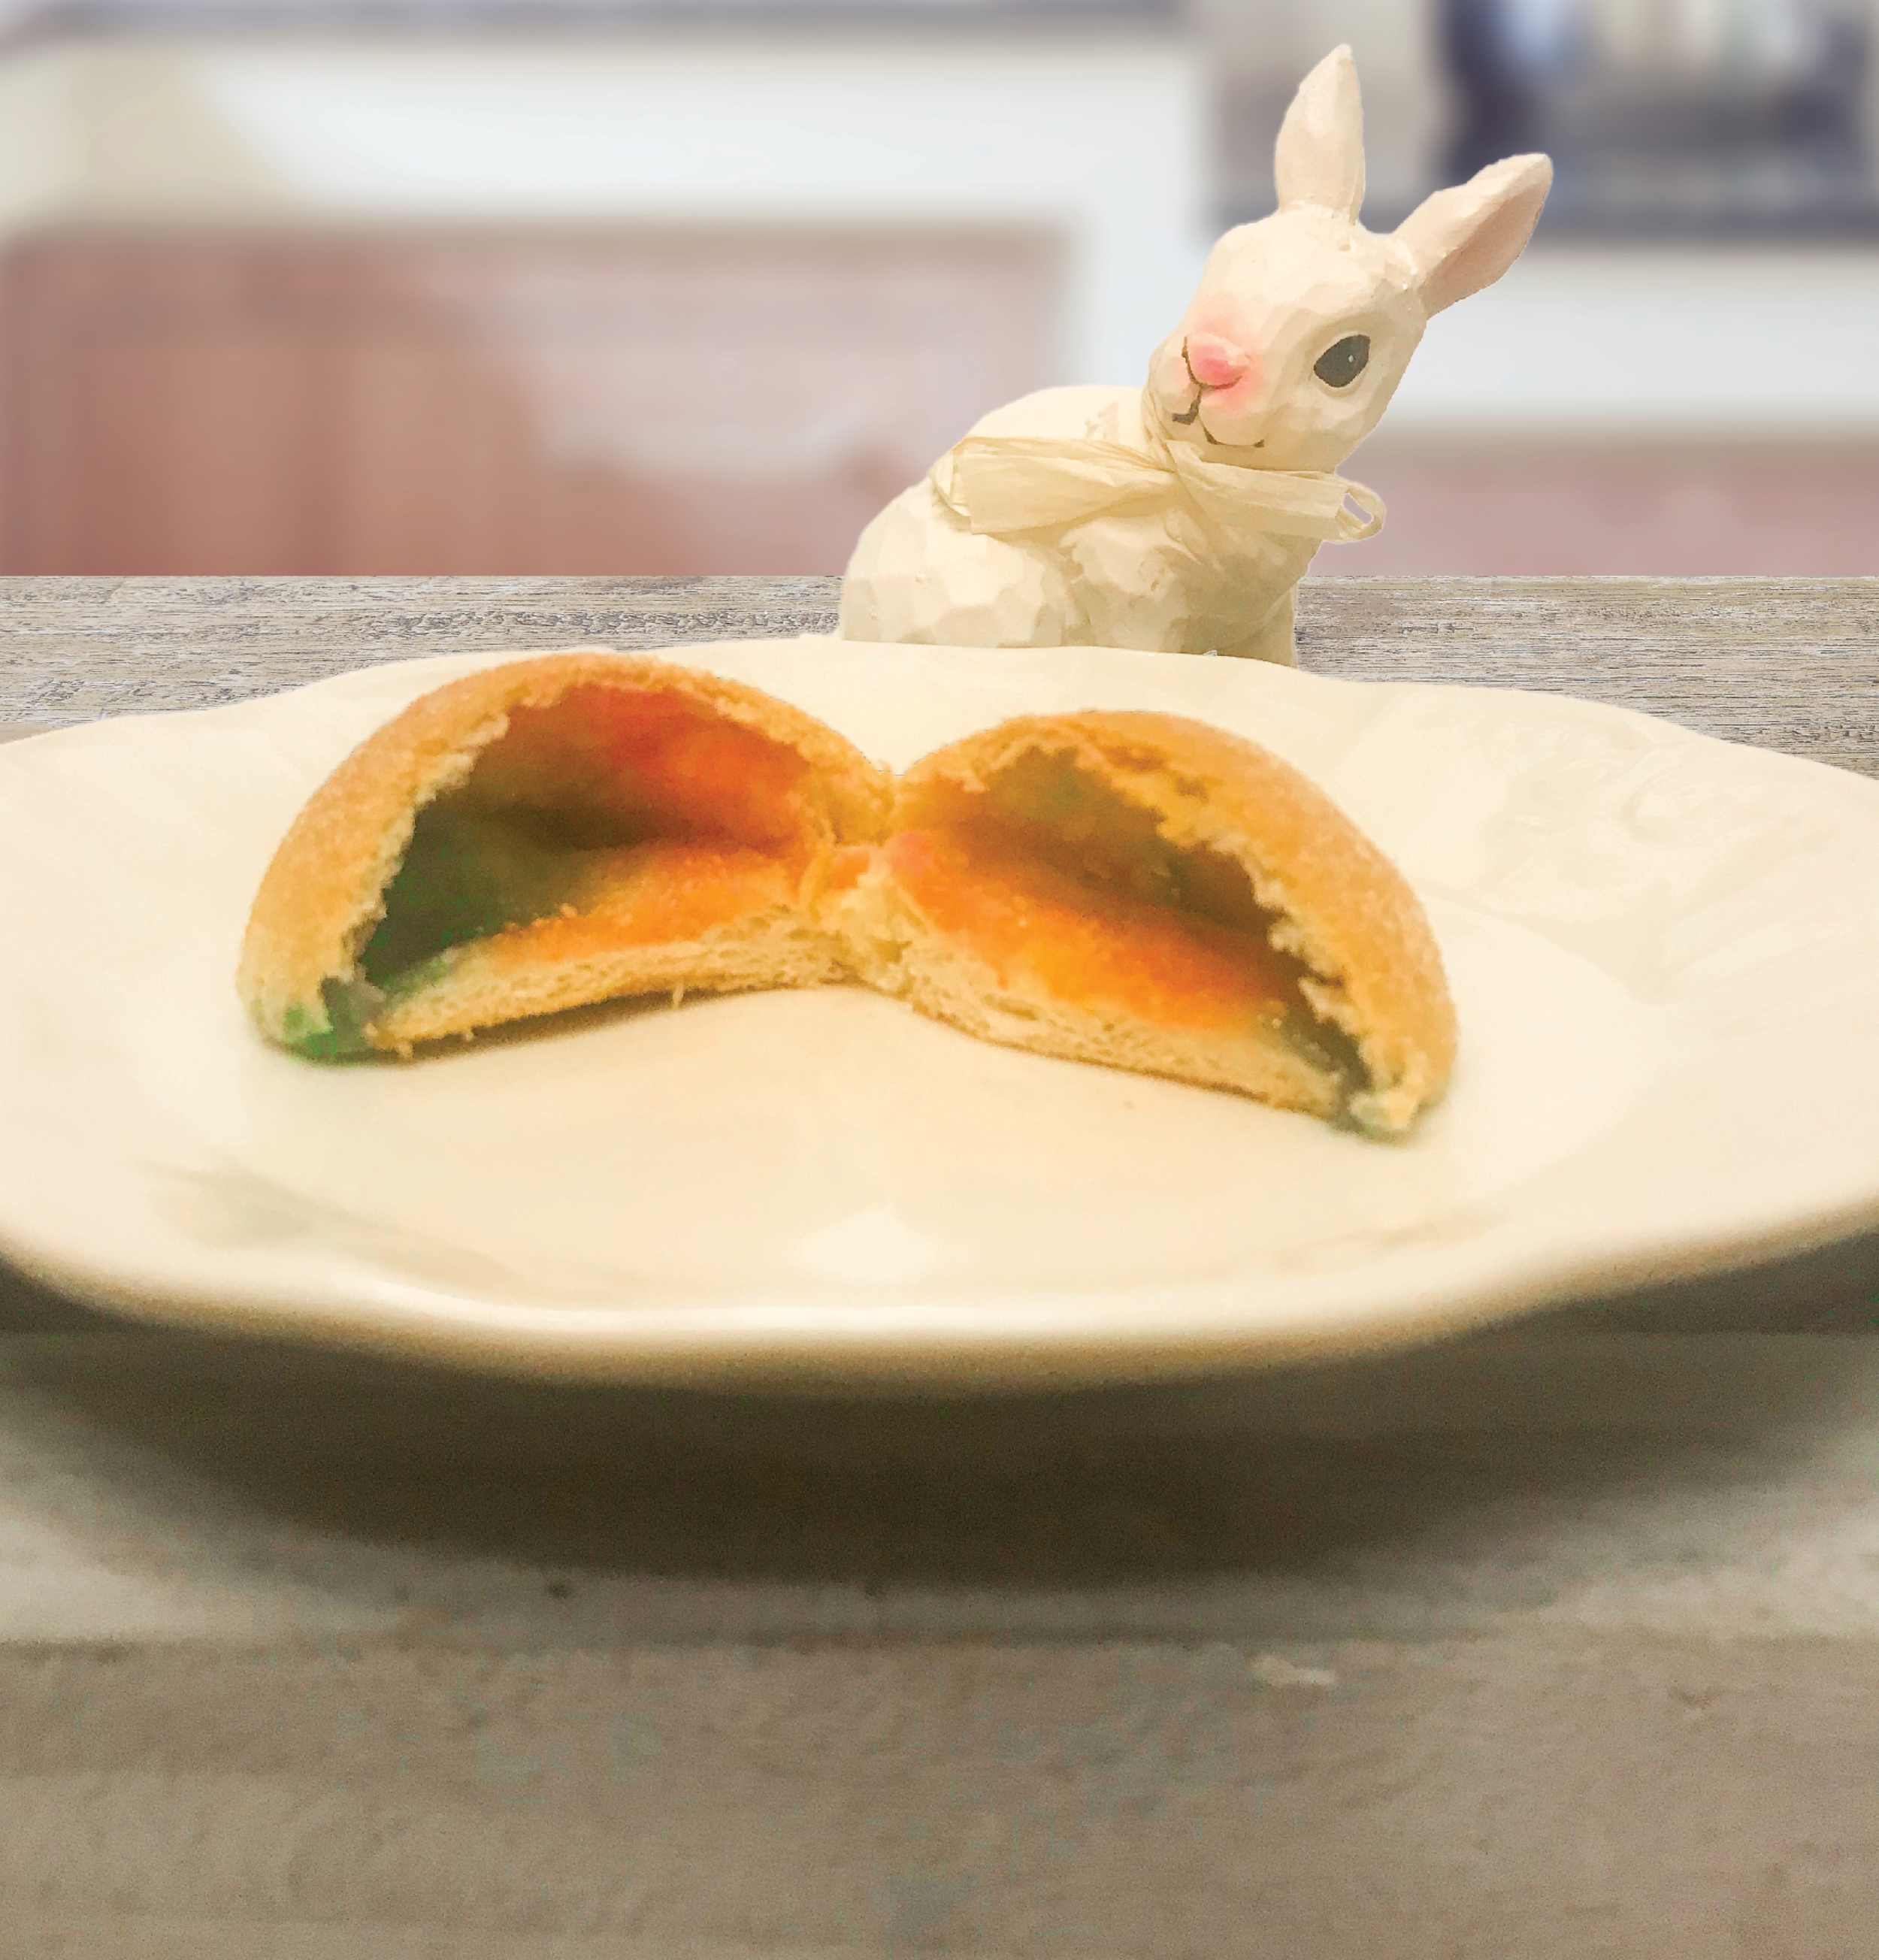 Hollow resurrection roll with colorful rainbow interior on a white platter in front of a ceramic bunny.